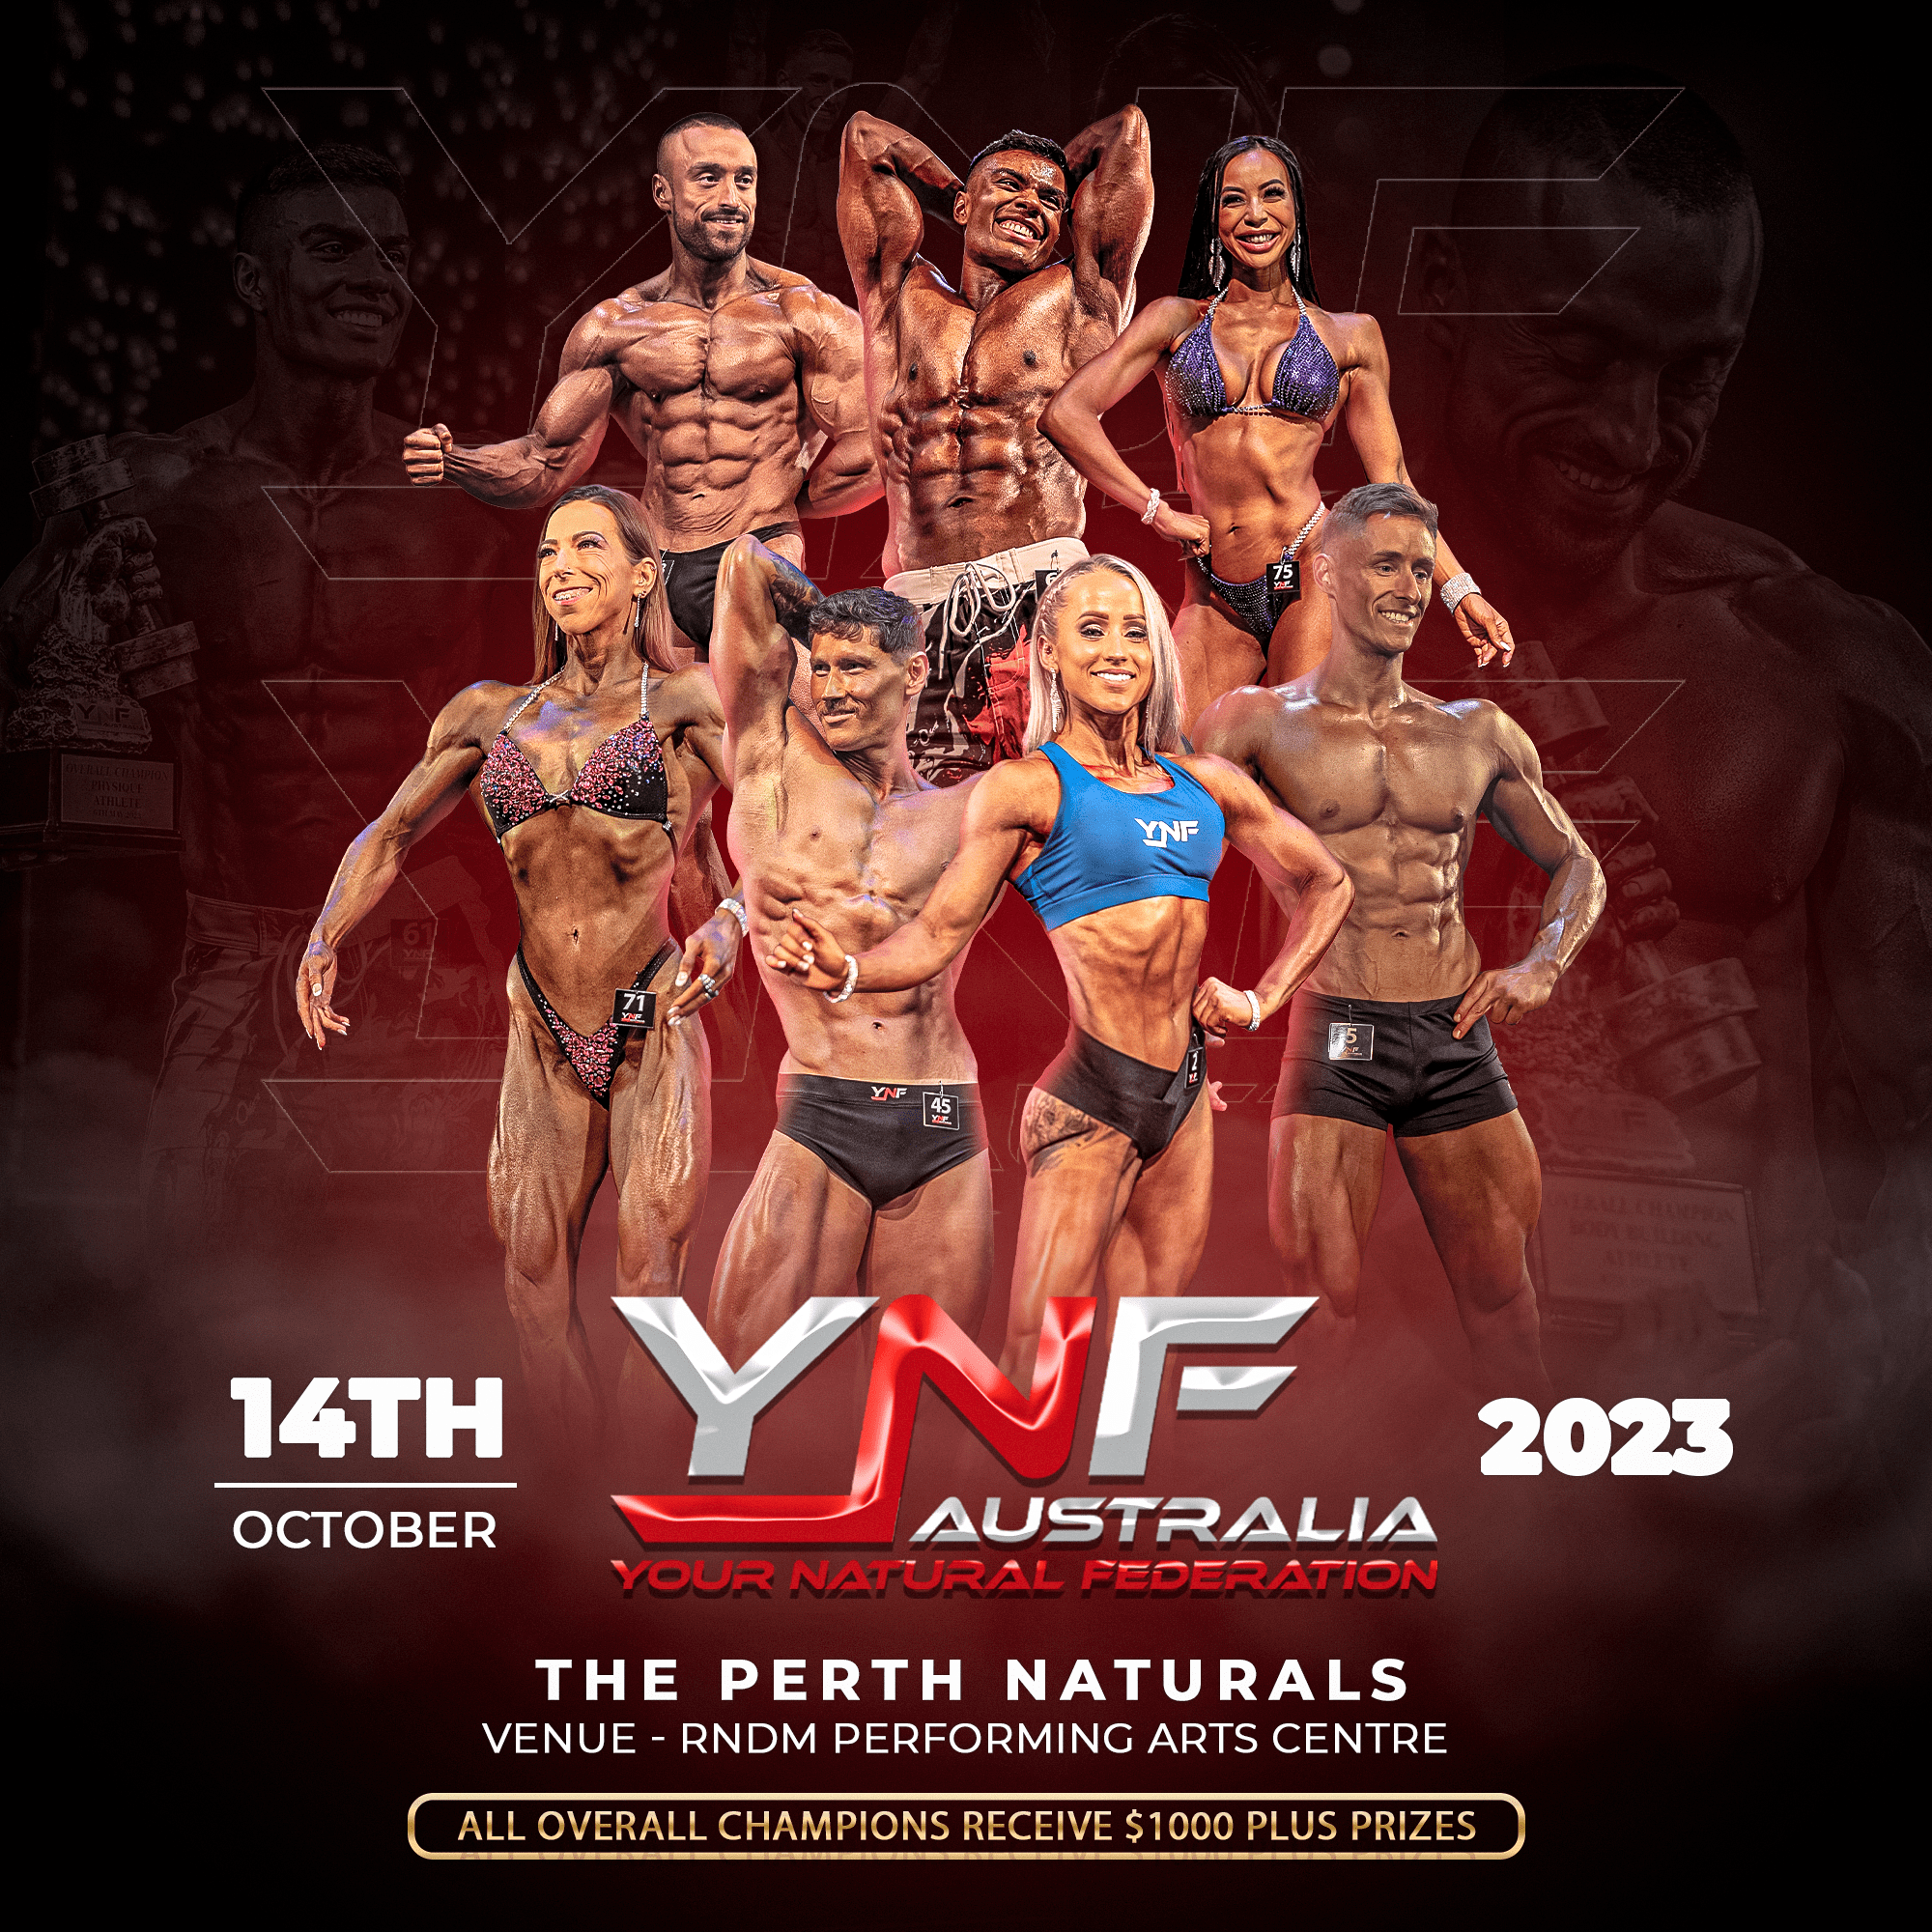 Show promo with bodybuilders and athletes standing